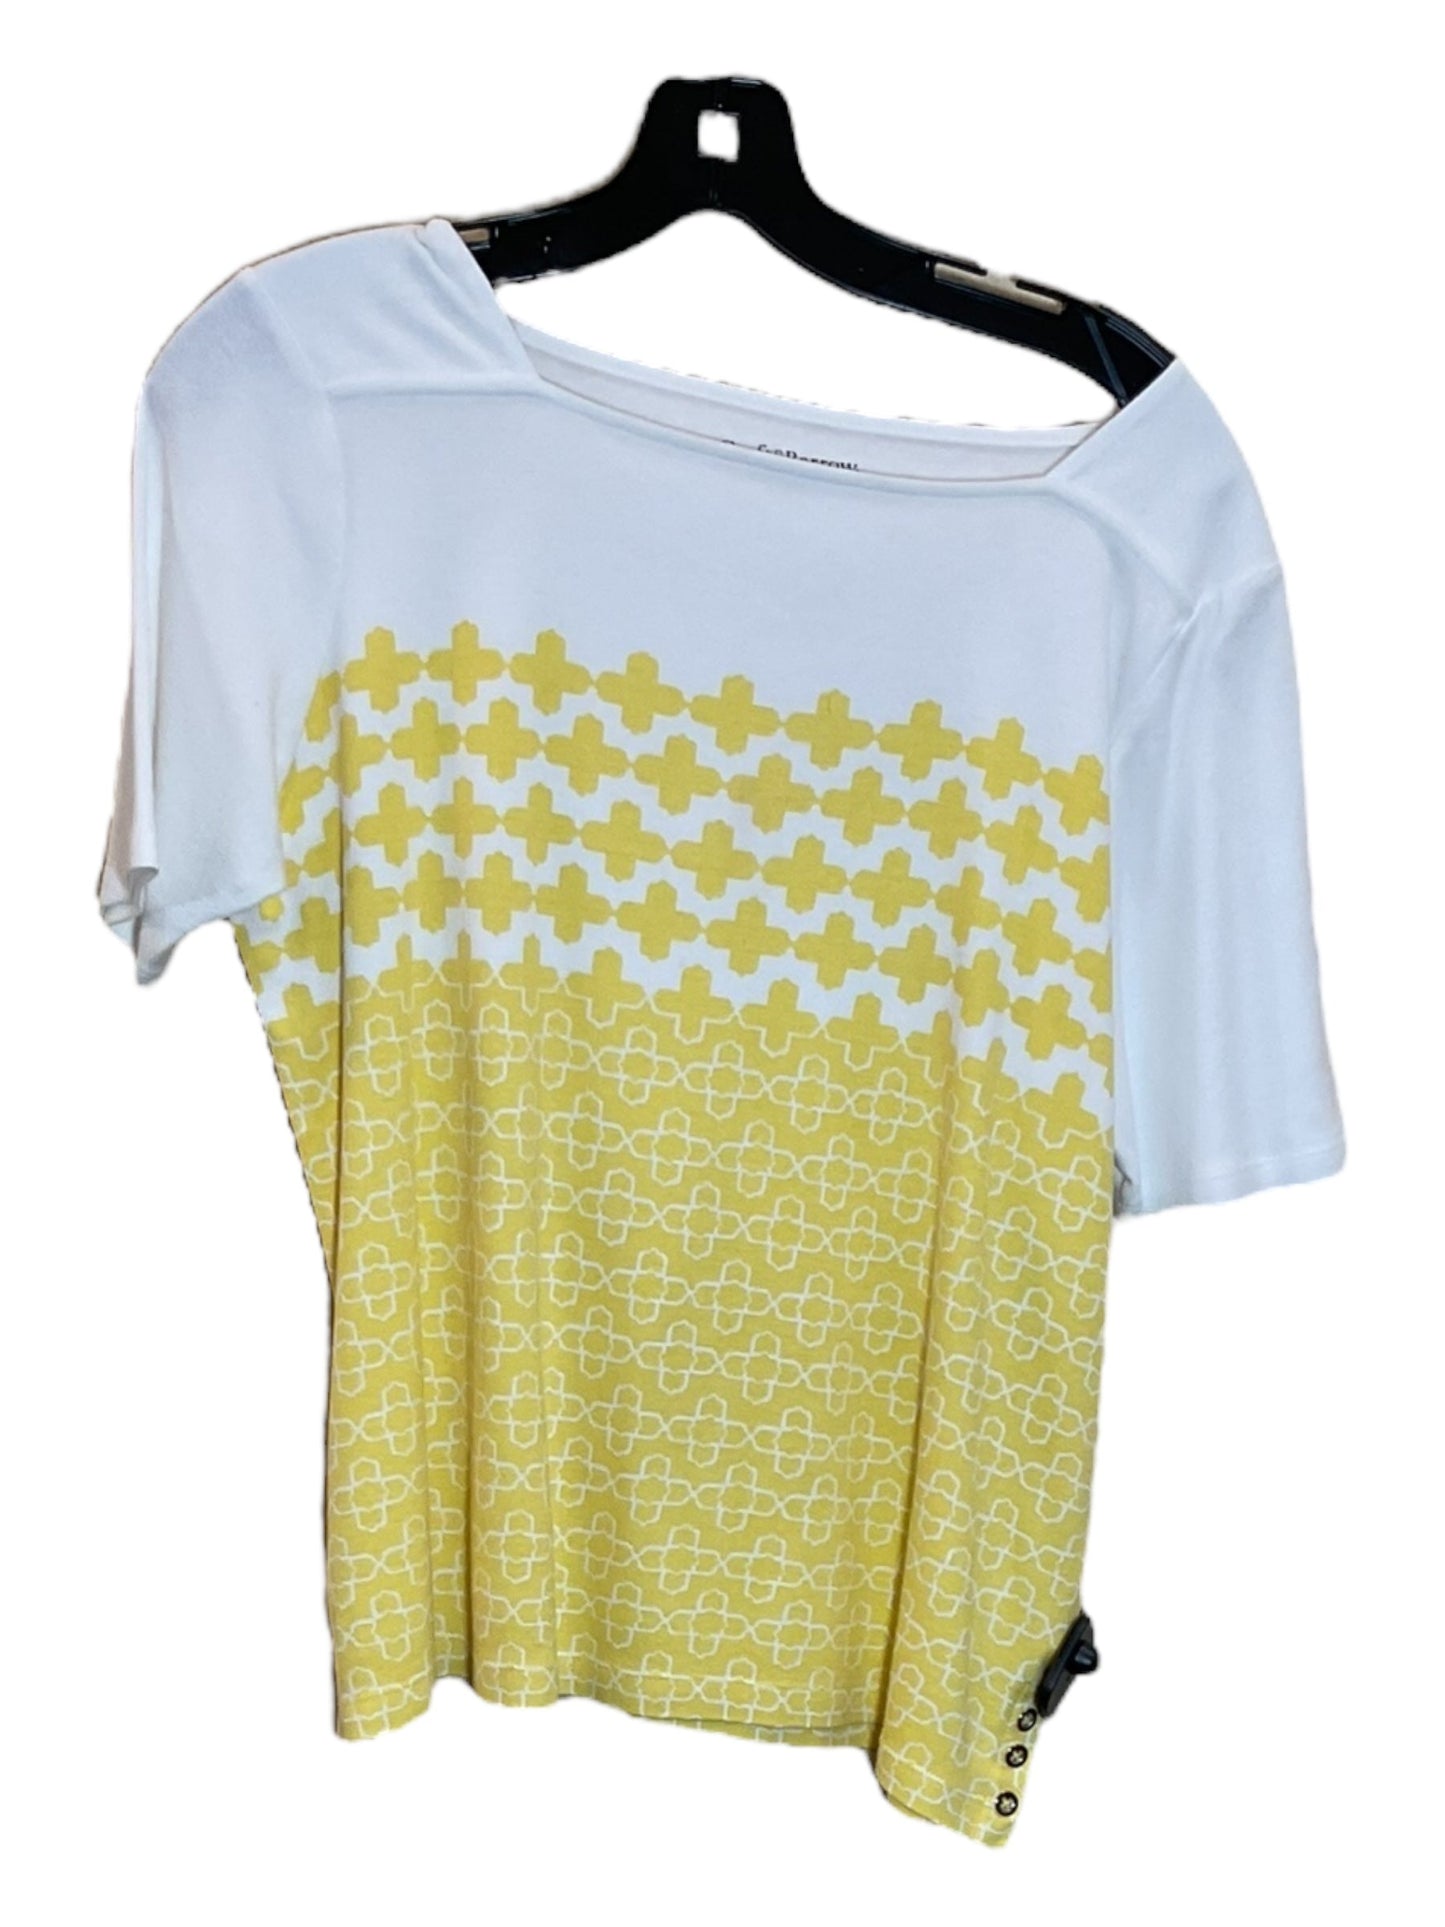 White & Yellow Top Short Sleeve Croft And Barrow, Size L